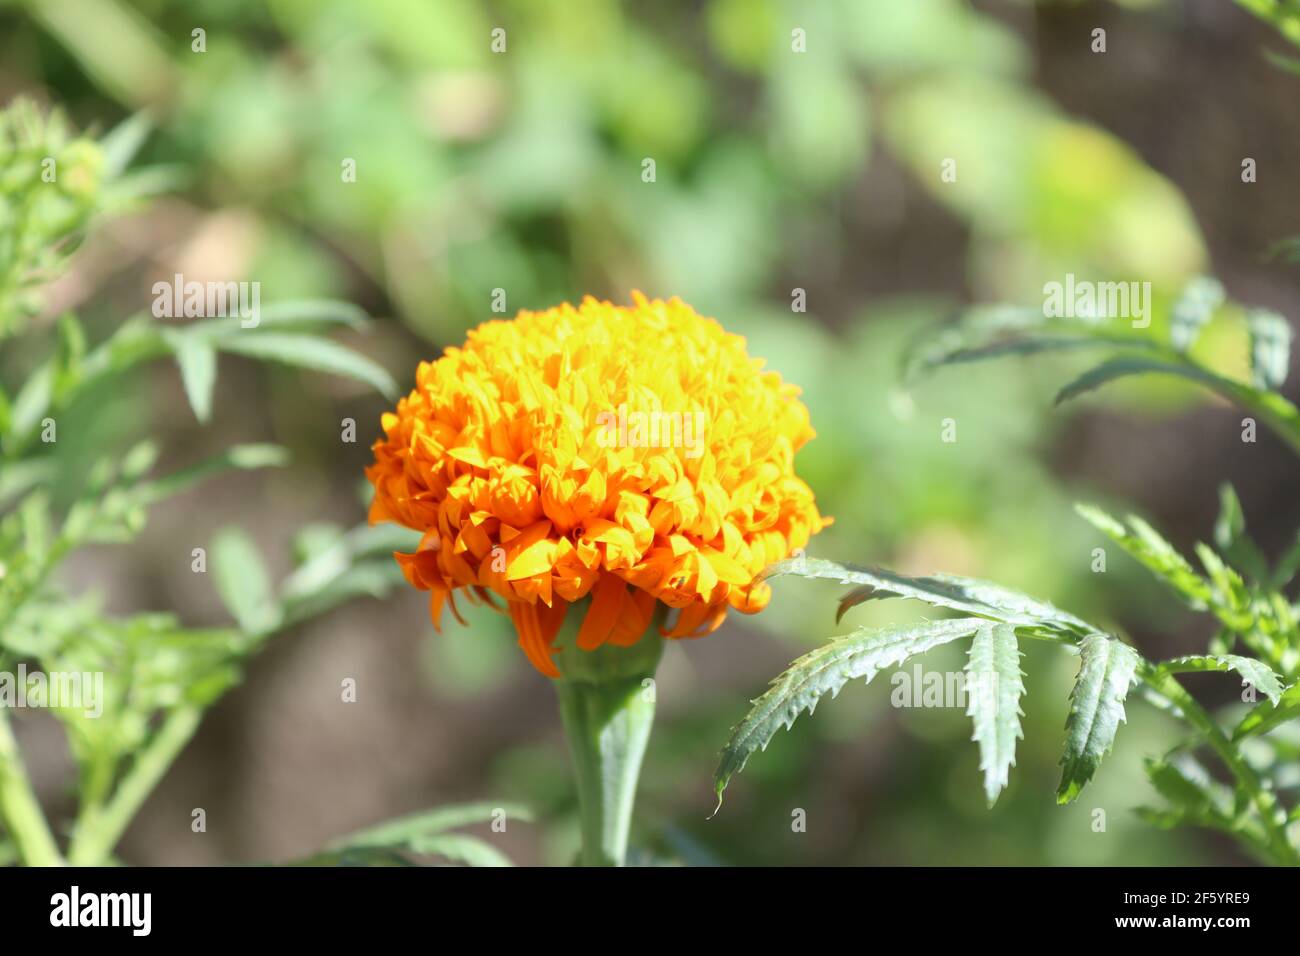 The Das flower in the sun in an Asian country. Stock Photo